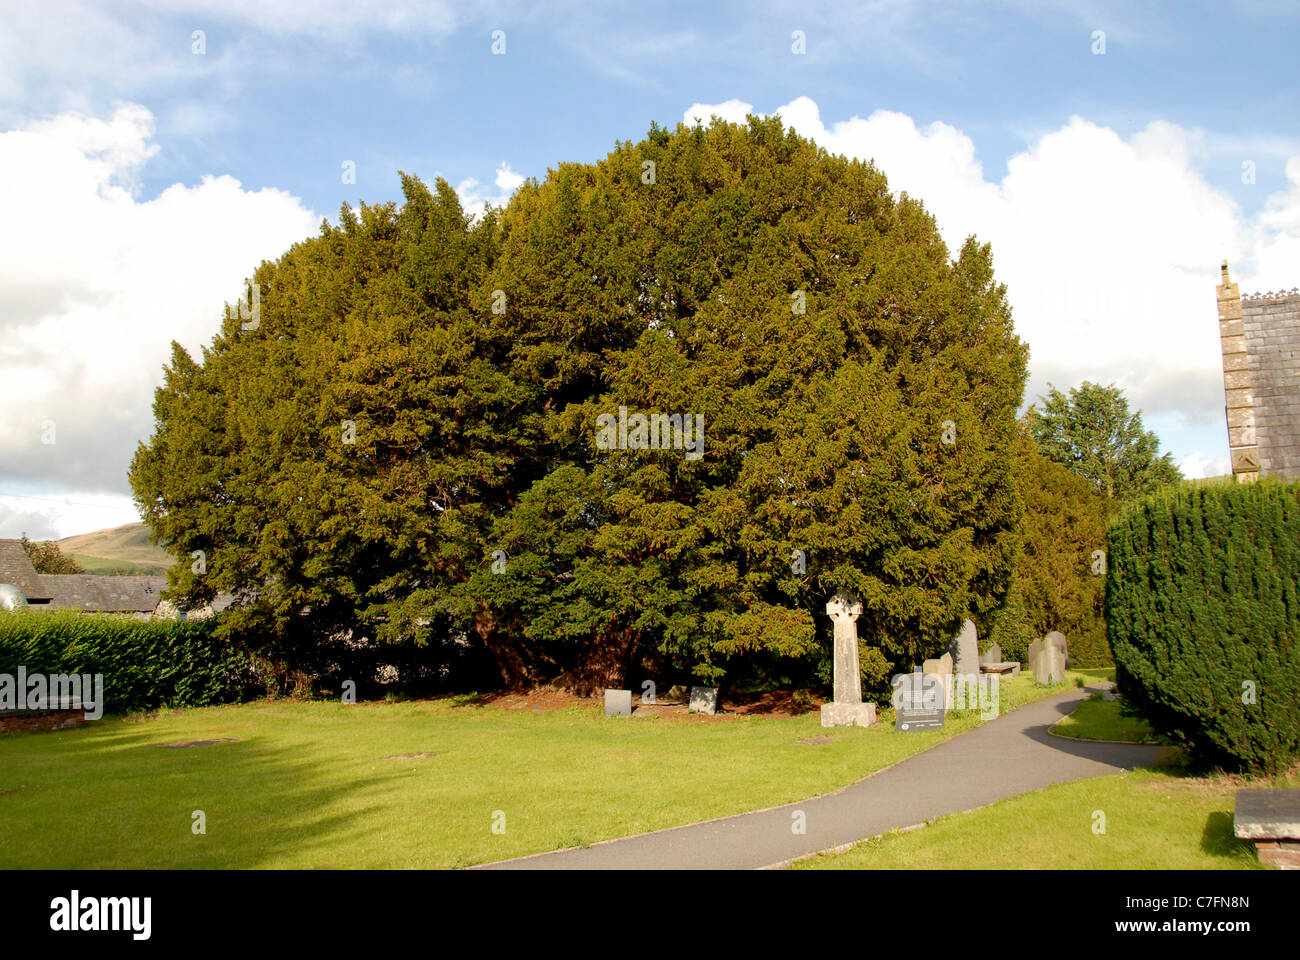 The ancient yew tree, reputedly more than 4,000 years old, in the church yard of St Digain in Llangernyw village in north Wales Stock Photo